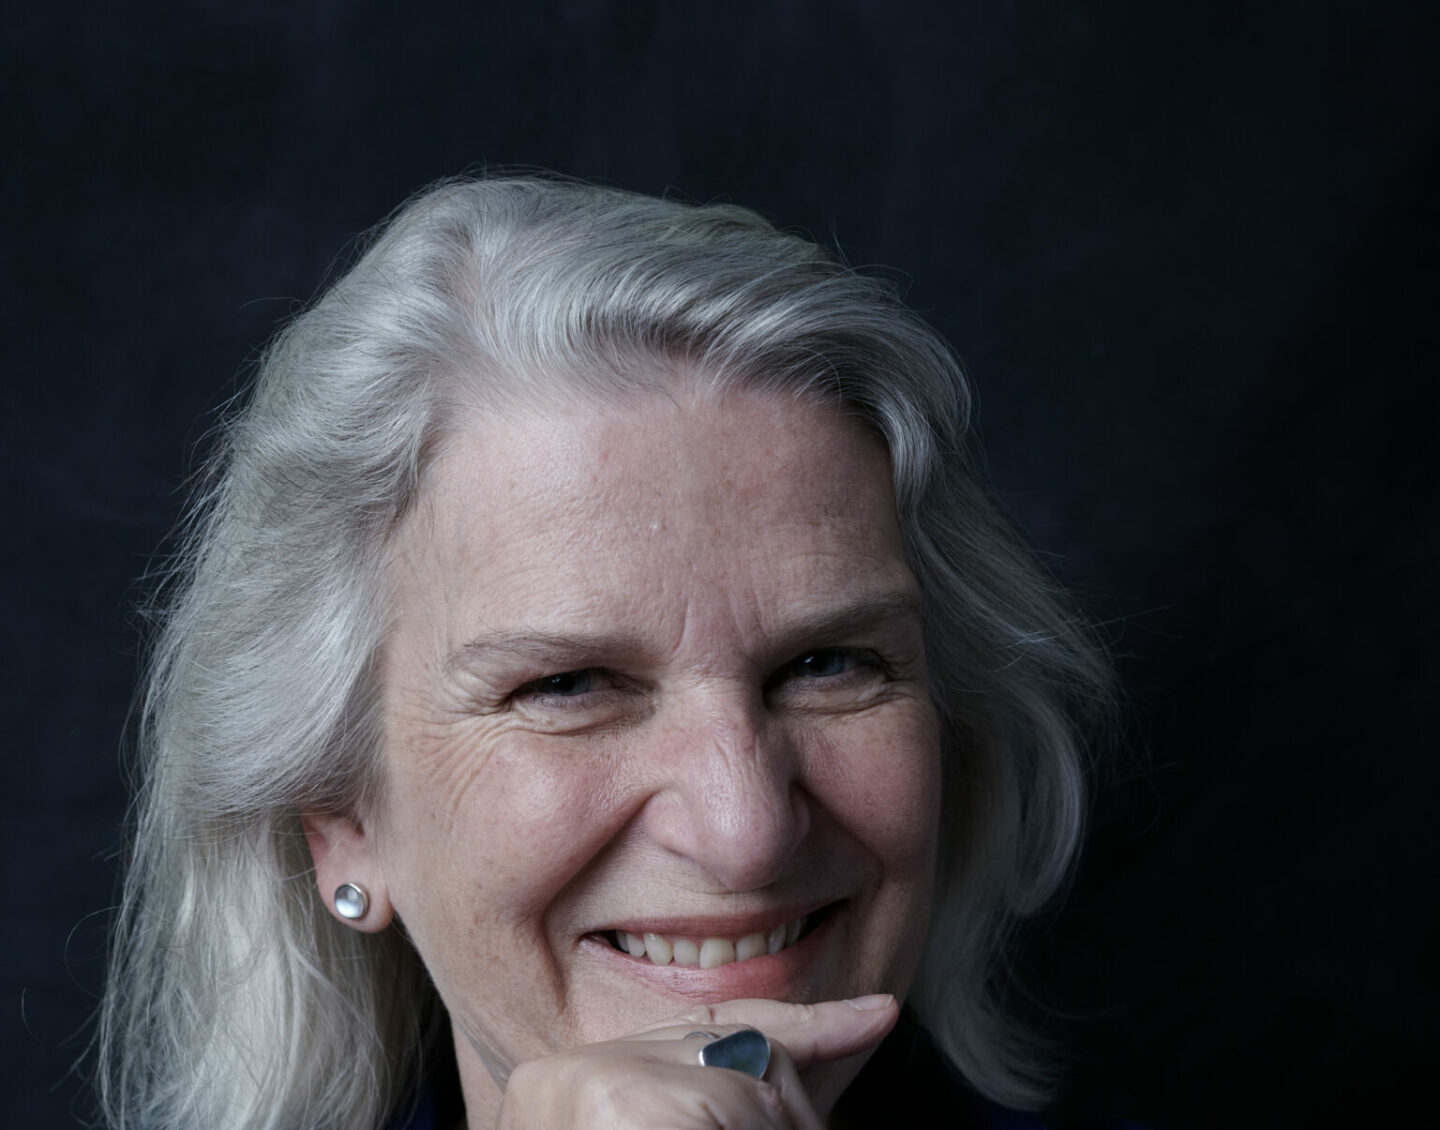 A woman with shoulder-length white hair smiles and rests her chin on a fist